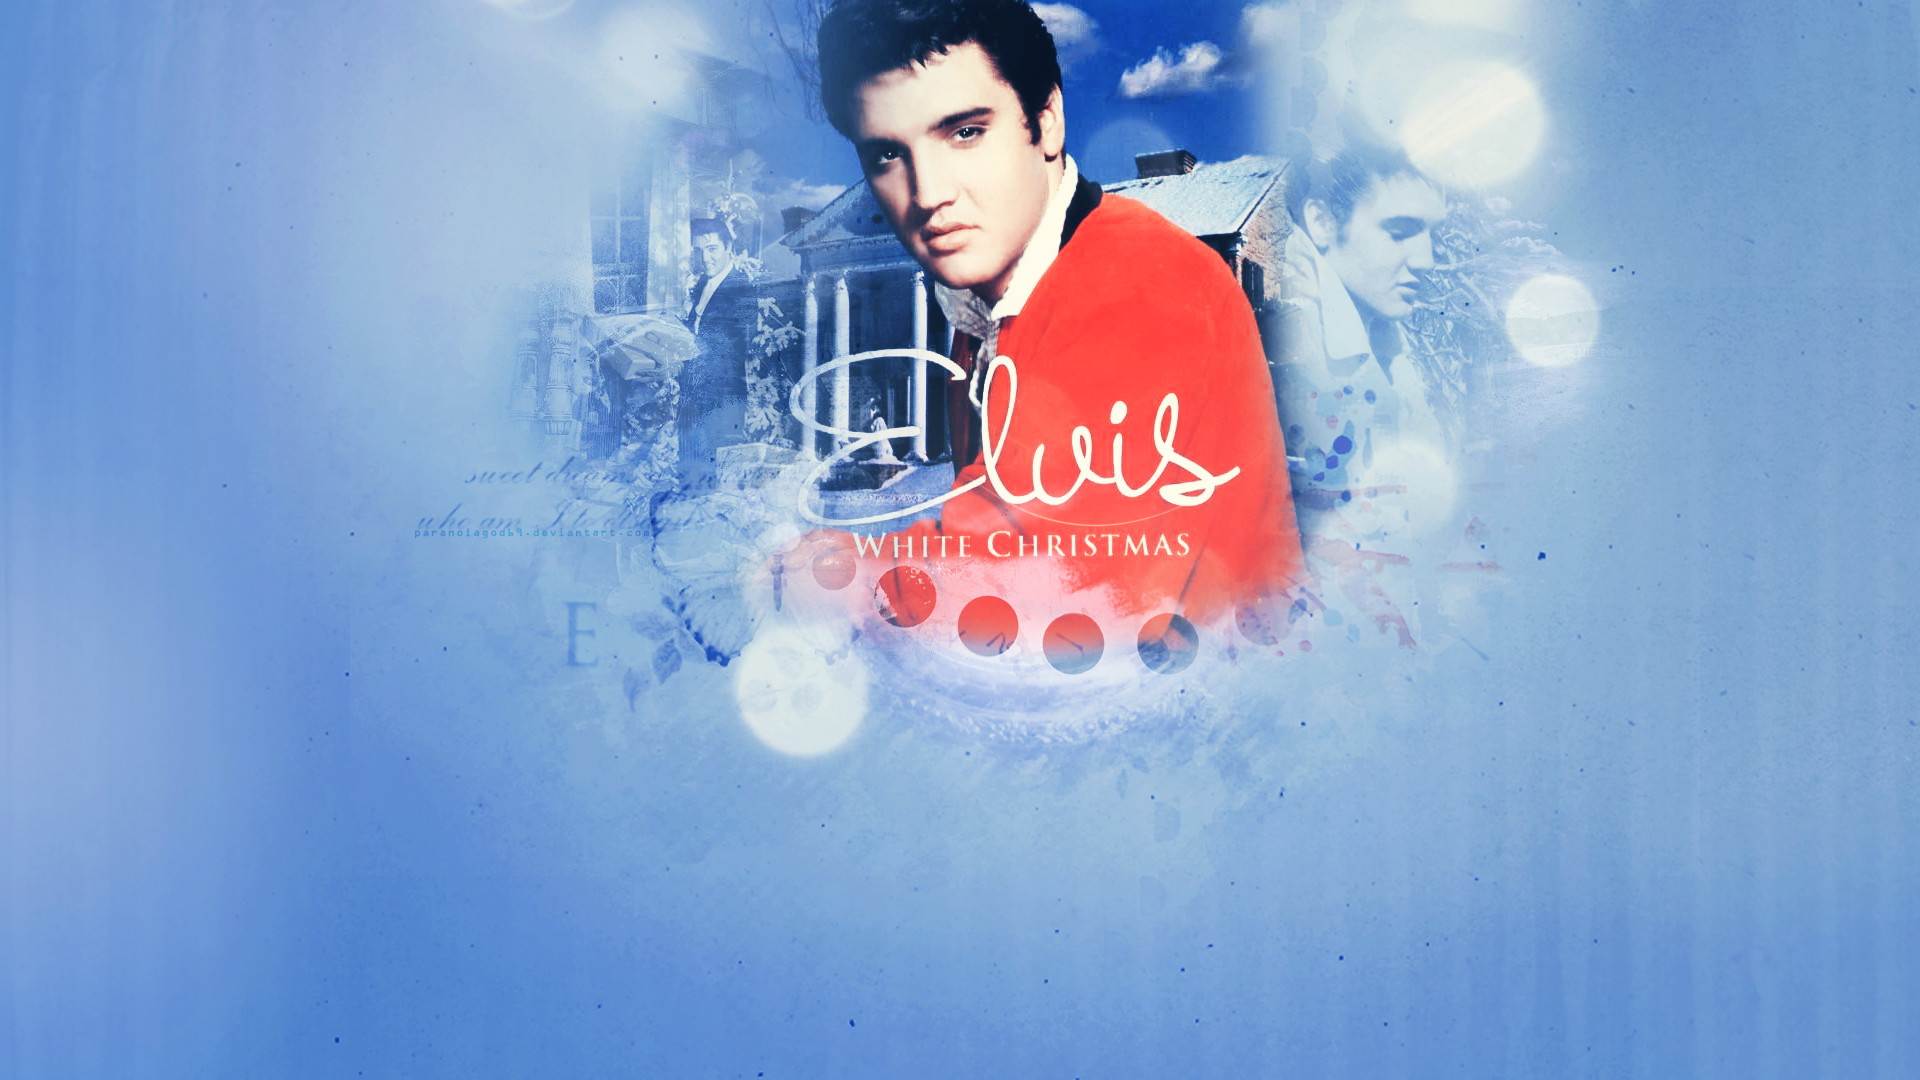 1920x1080 Quality Cool Elvis Presley Wallpapers